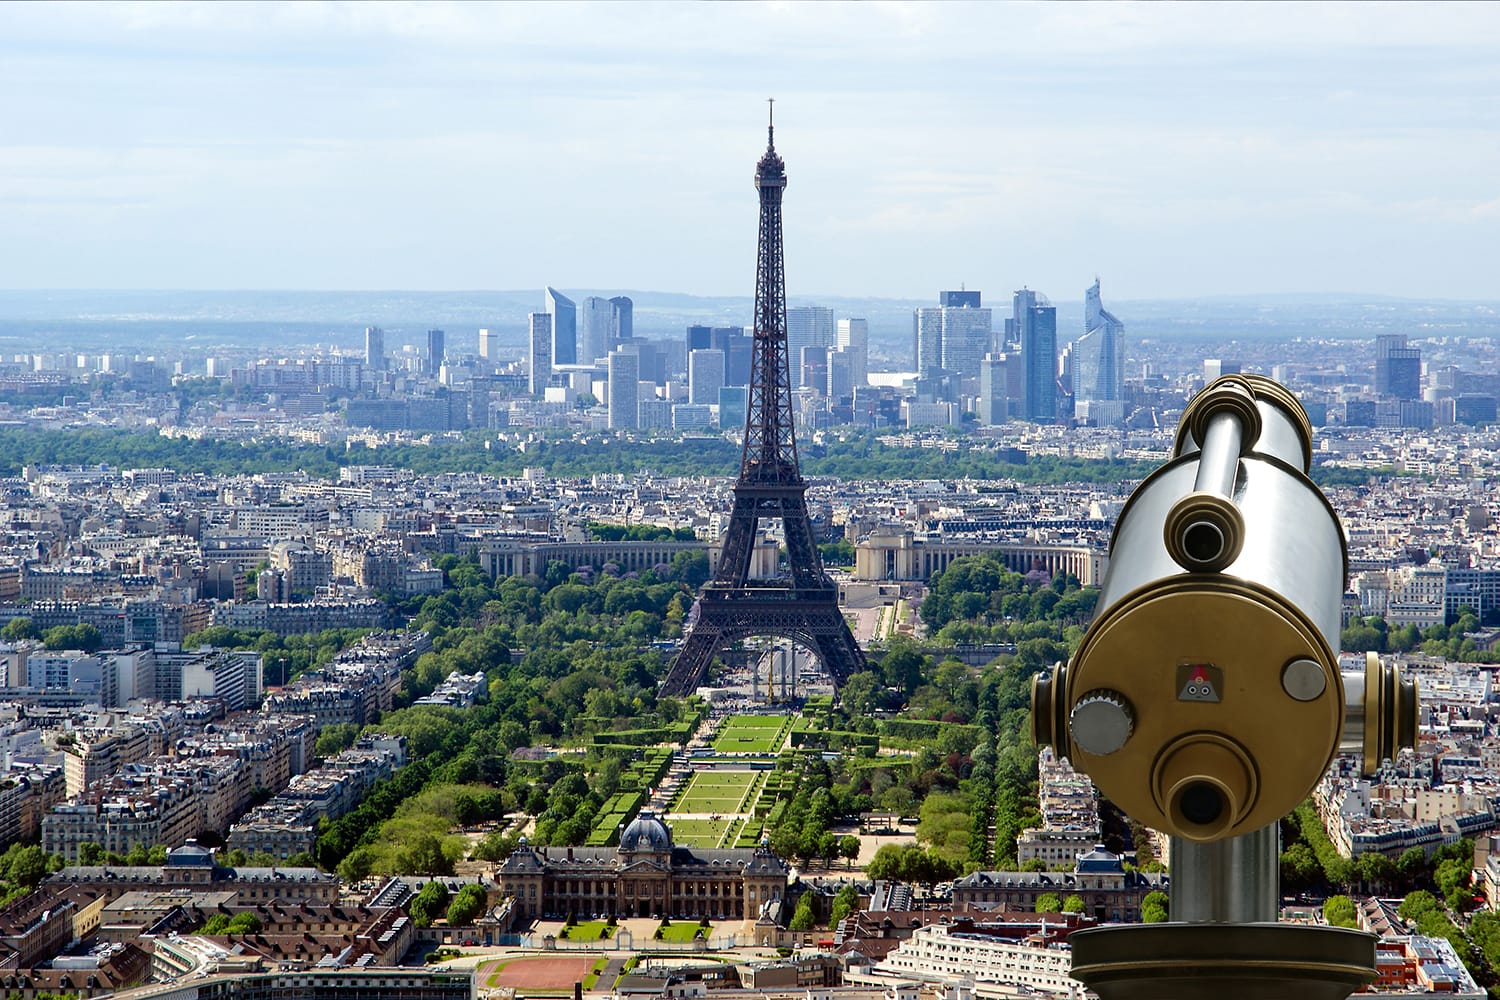 Telescope viewer and city skyline at daytime. Paris, France. Taken from the tour Montparnasse